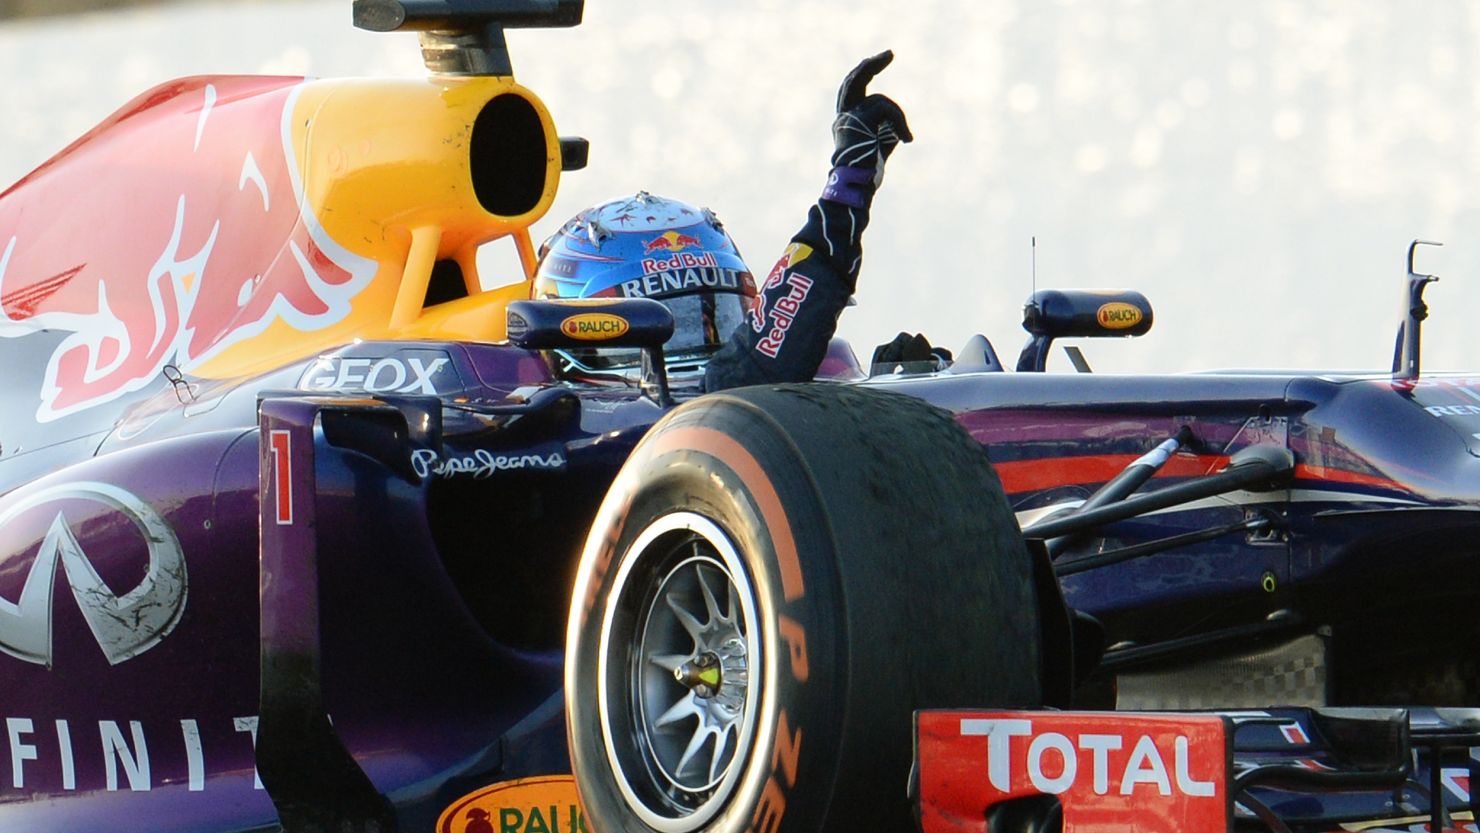 Sebastian Vettel gives his trademark victory salute after a superb drive to win the Japanese Grand Prix at Suzuka.